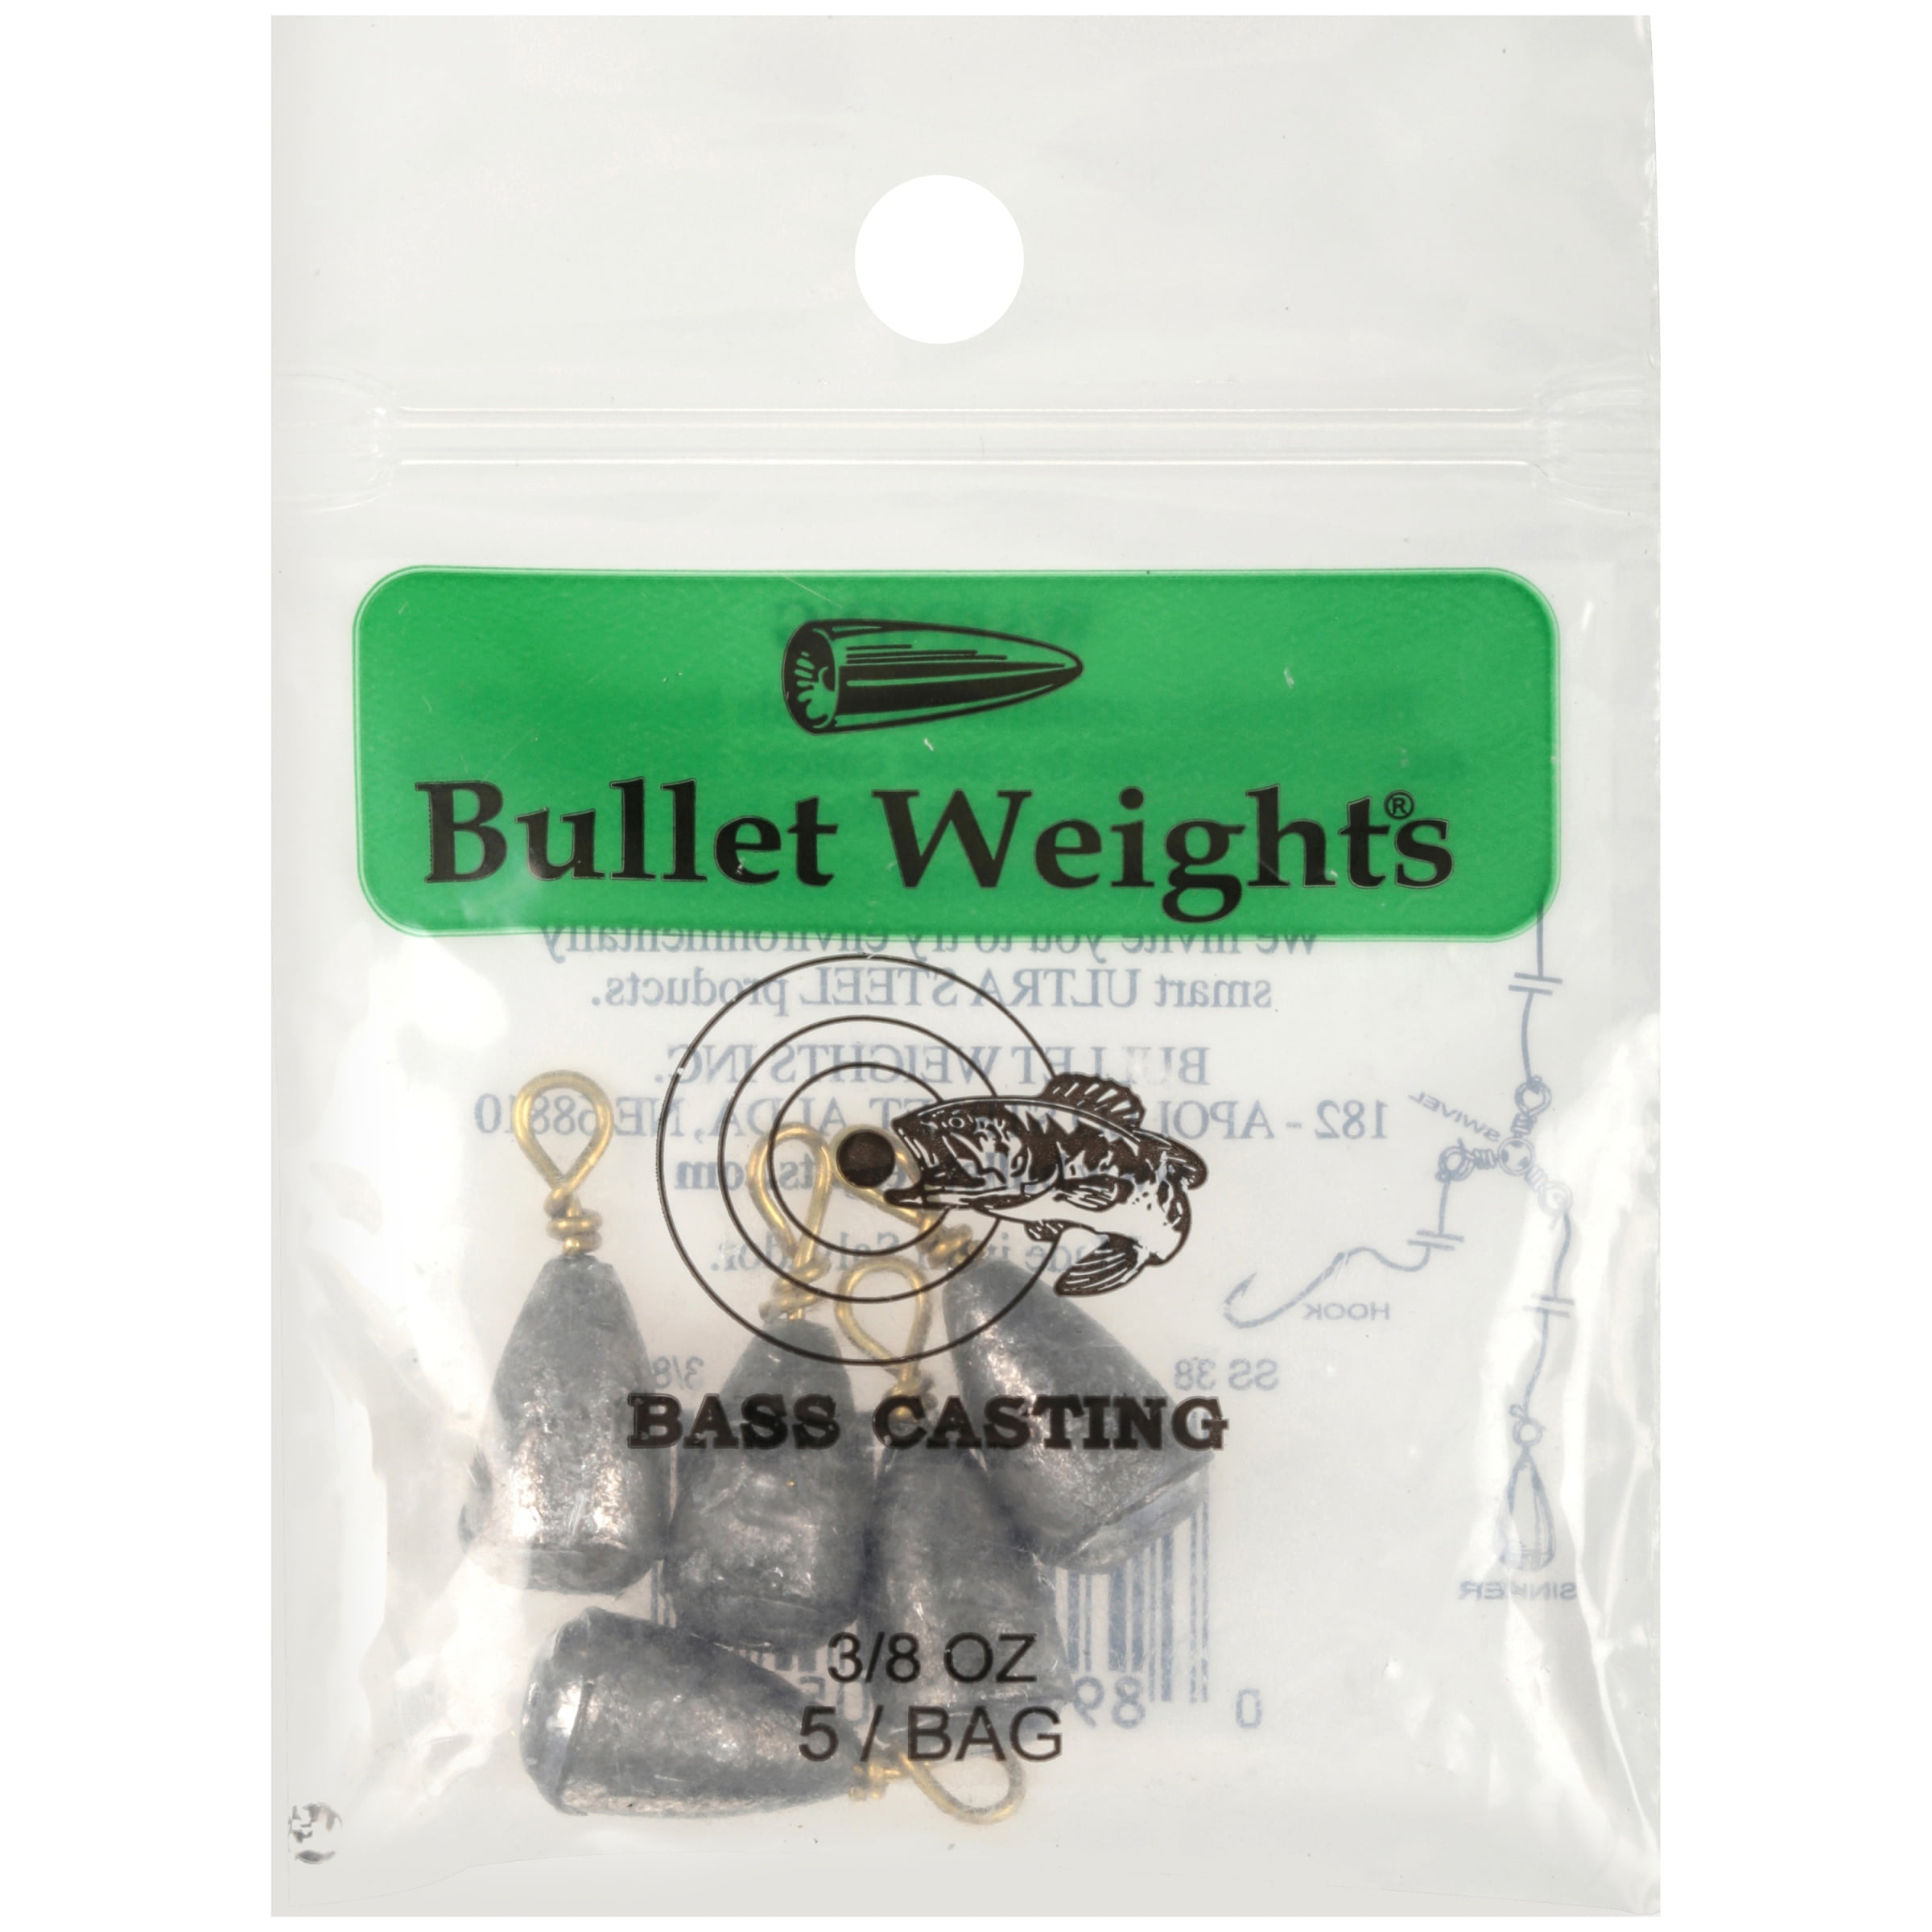 Bullet Weights® SS38-24 Lead Bass Casting Size 7, 3/8 oz Fishing Weights, 5  sinkers 